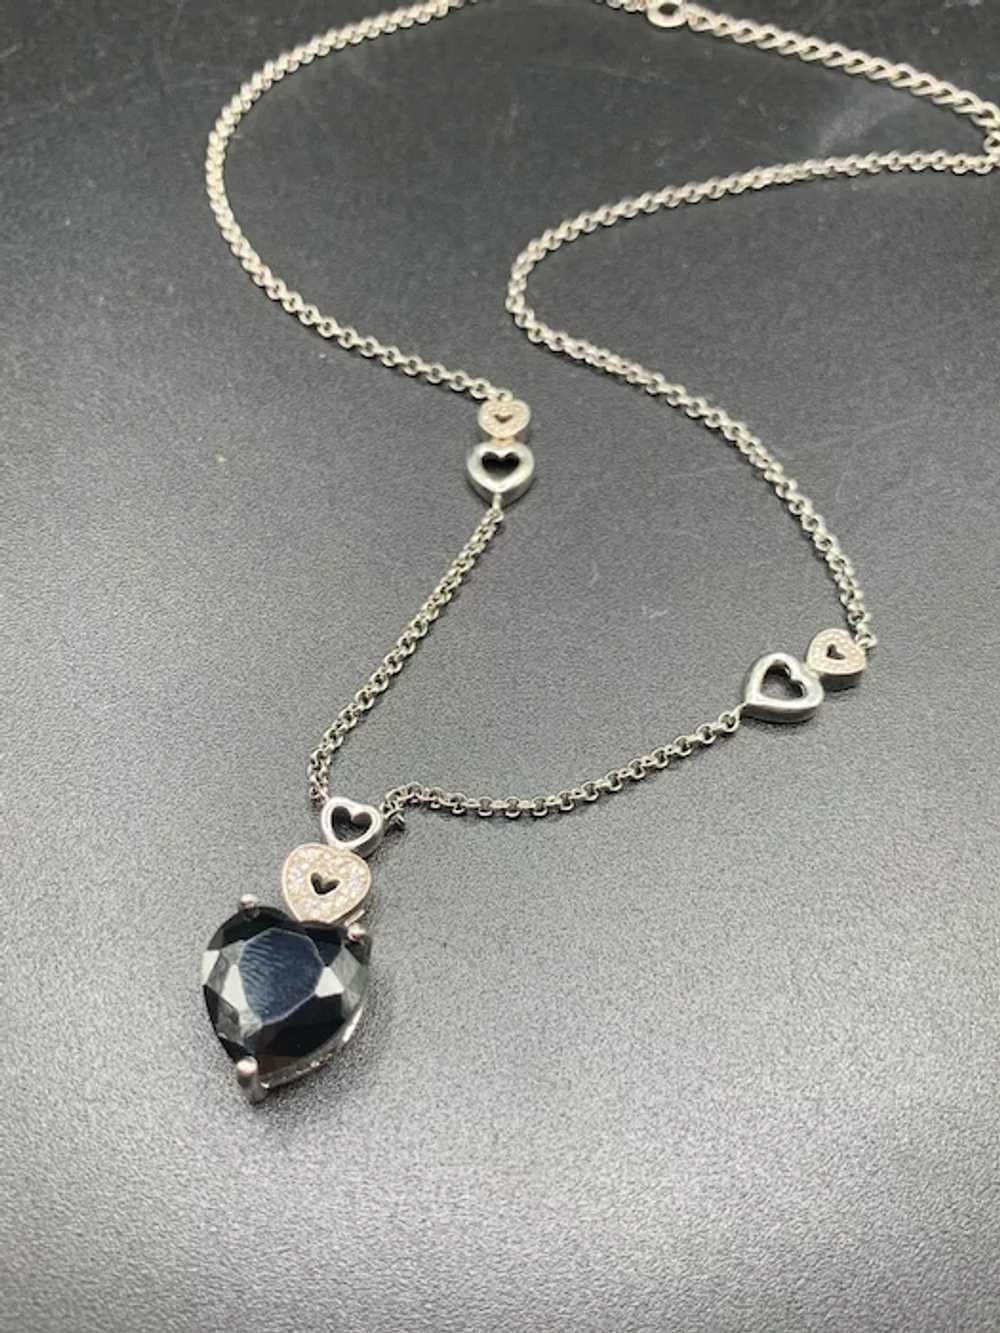 Hematite Heart Necklace Sterling Silver Chain Fac… - image 3